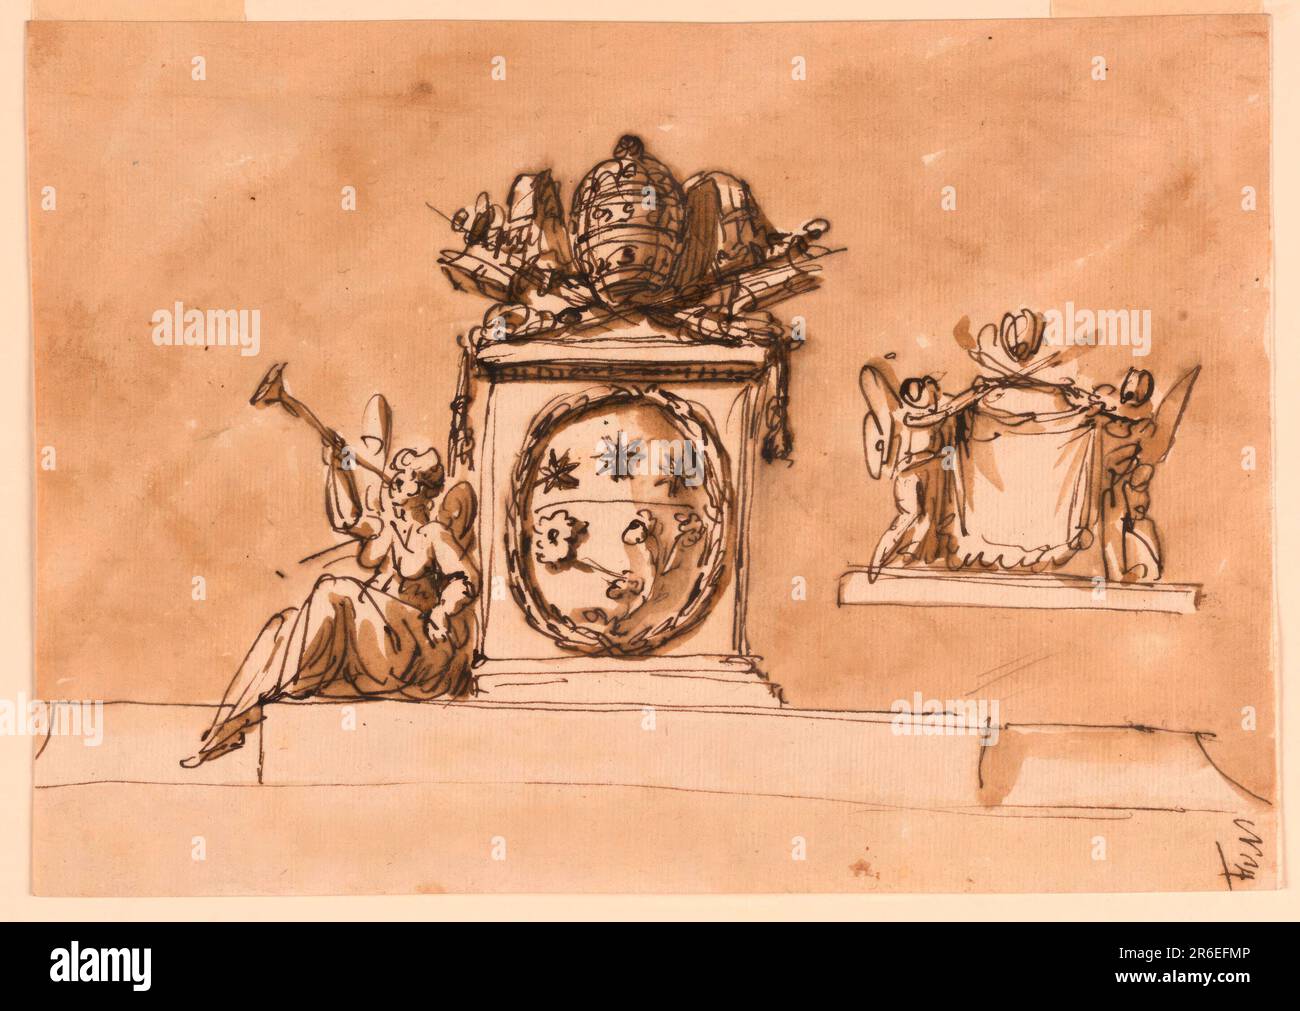 Upon a broad base rises a pedestal in the center, with the coat of arms of the pope in a wreath at the front. On top the keys and the tiara. At left, upon the base, sits a winged female genius, blowing the trumpet. At right is a sketch: two winged figures standing upon a base support a drapery and the two crossed keys. On top the tiara. Usual background. Pen and brown ink, brush and brown wash. Date: ca. 1786. Museum: Cooper Hewitt, Smithsonian Design Museum. Stock Photo